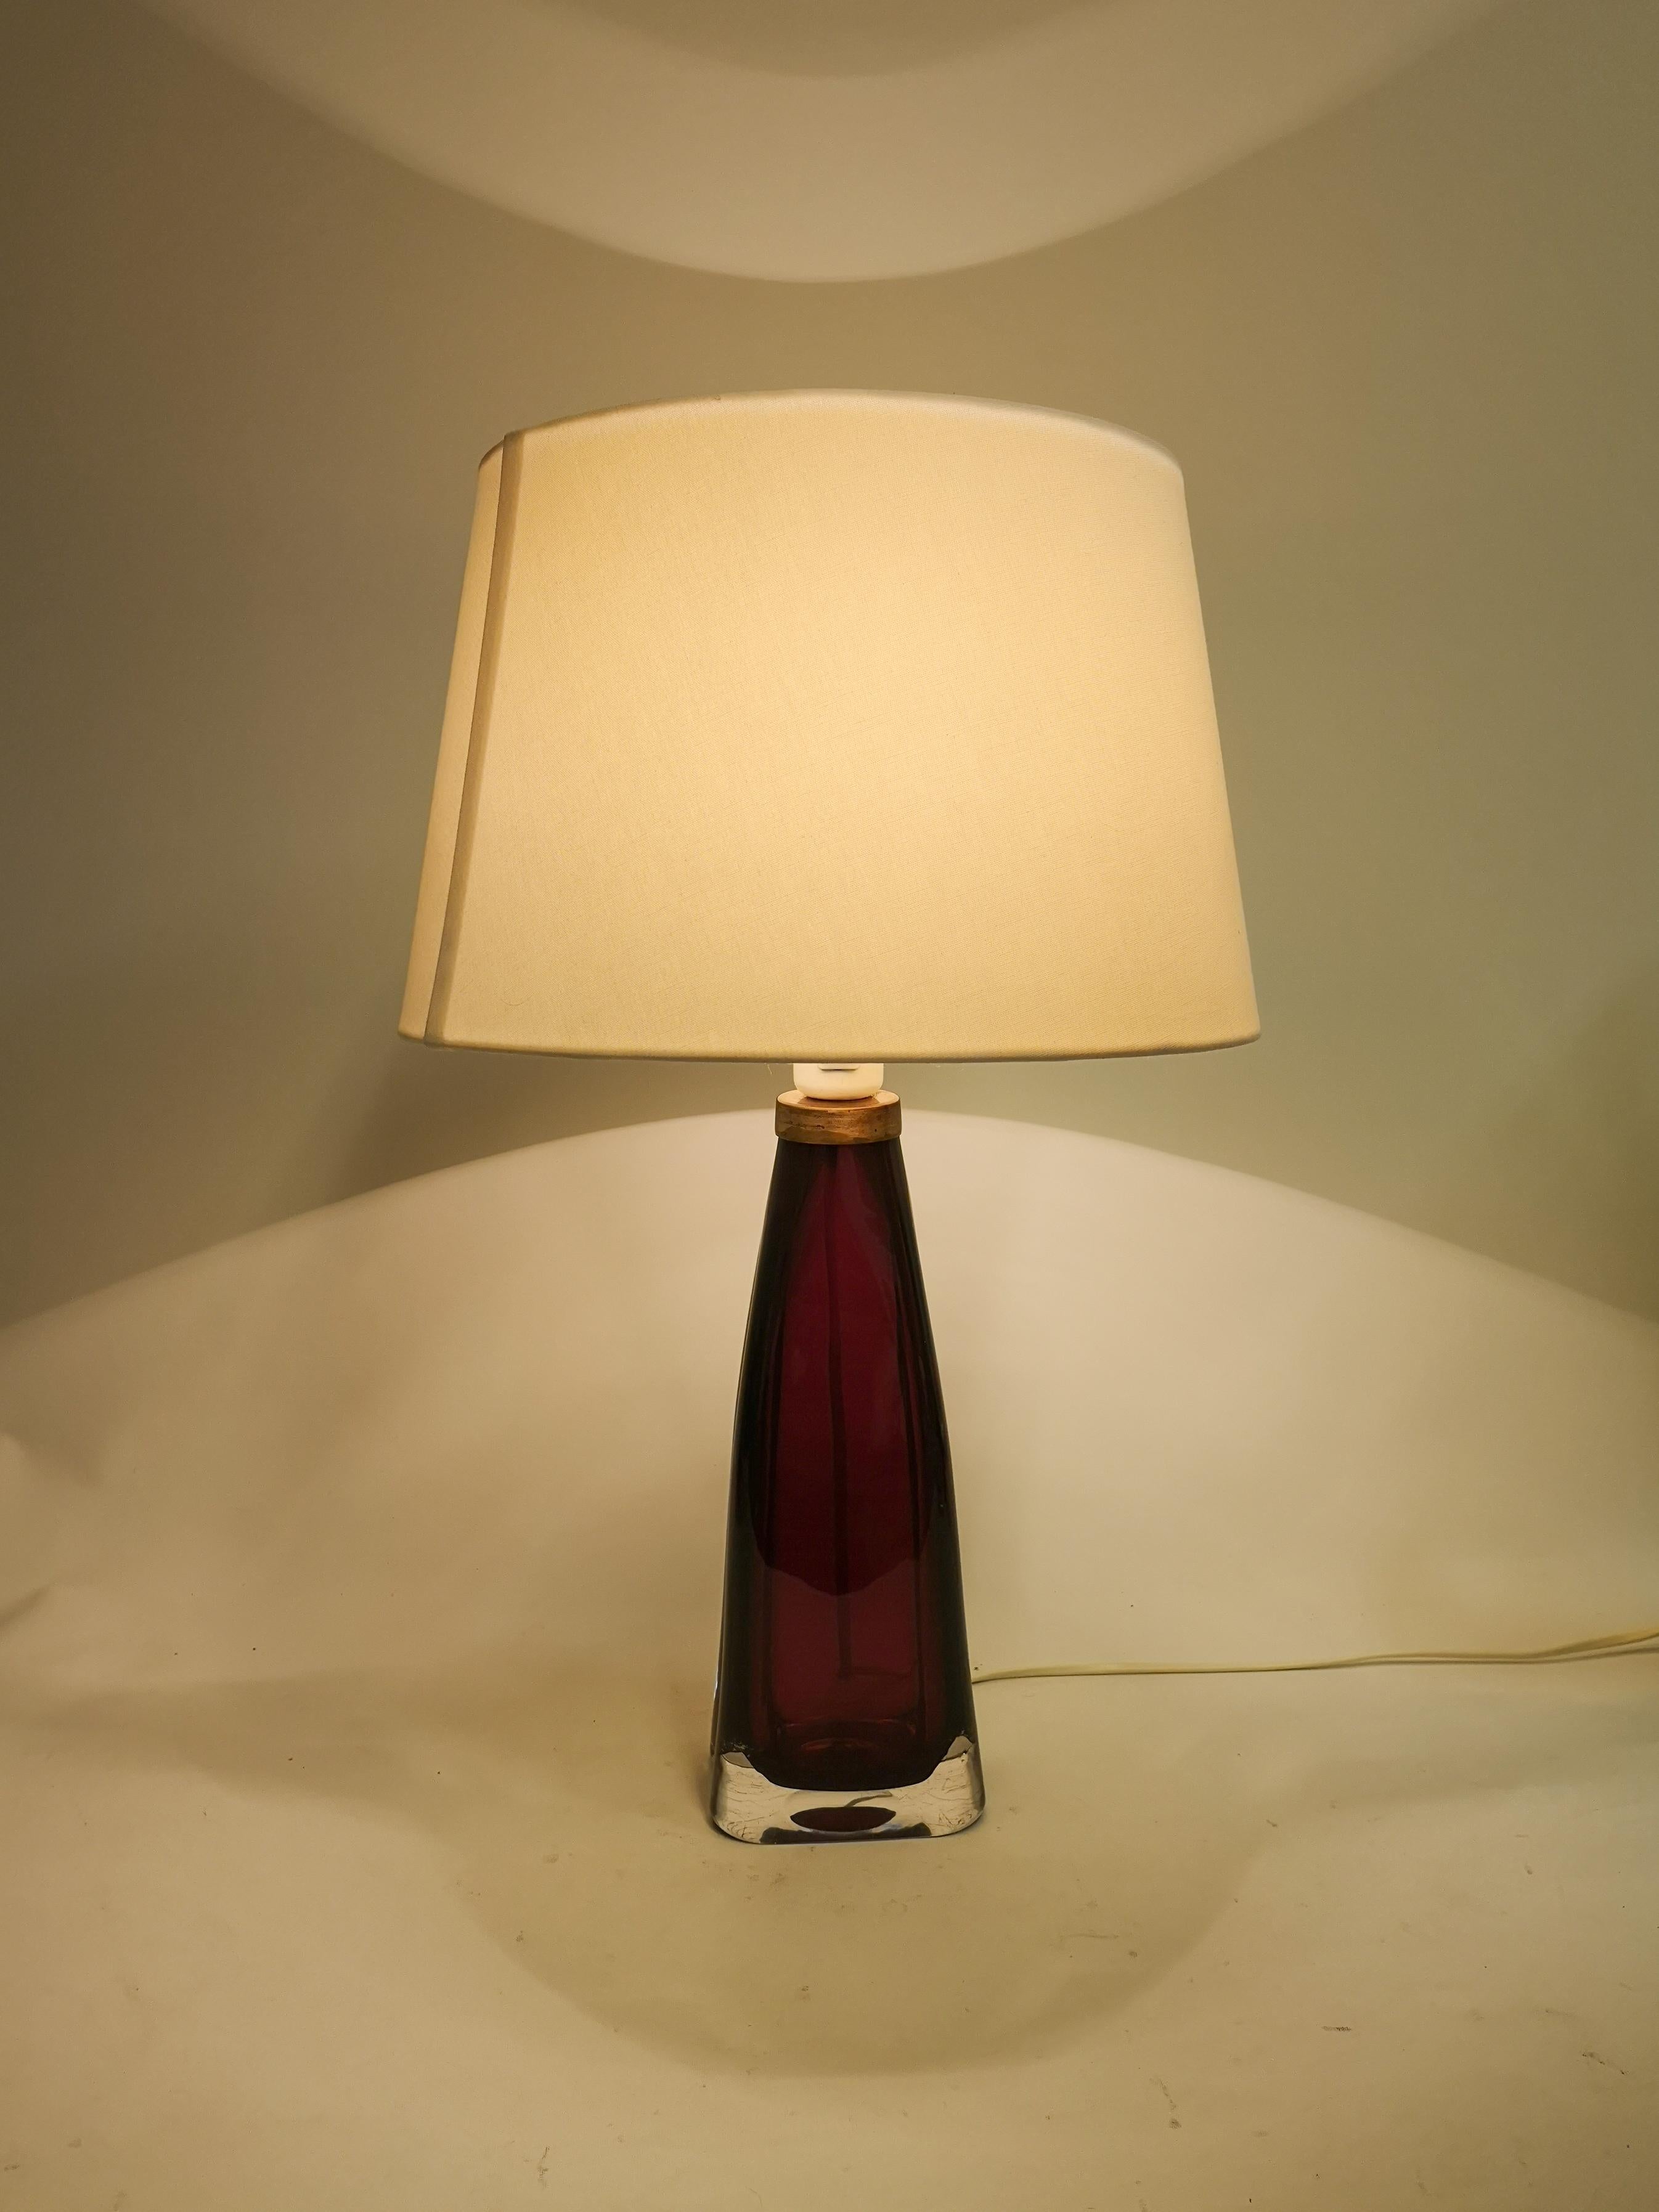 Mid-20th Century Midcentury Table Lamp by Carl Fagerlund for Orrefors Sweden RD 1323